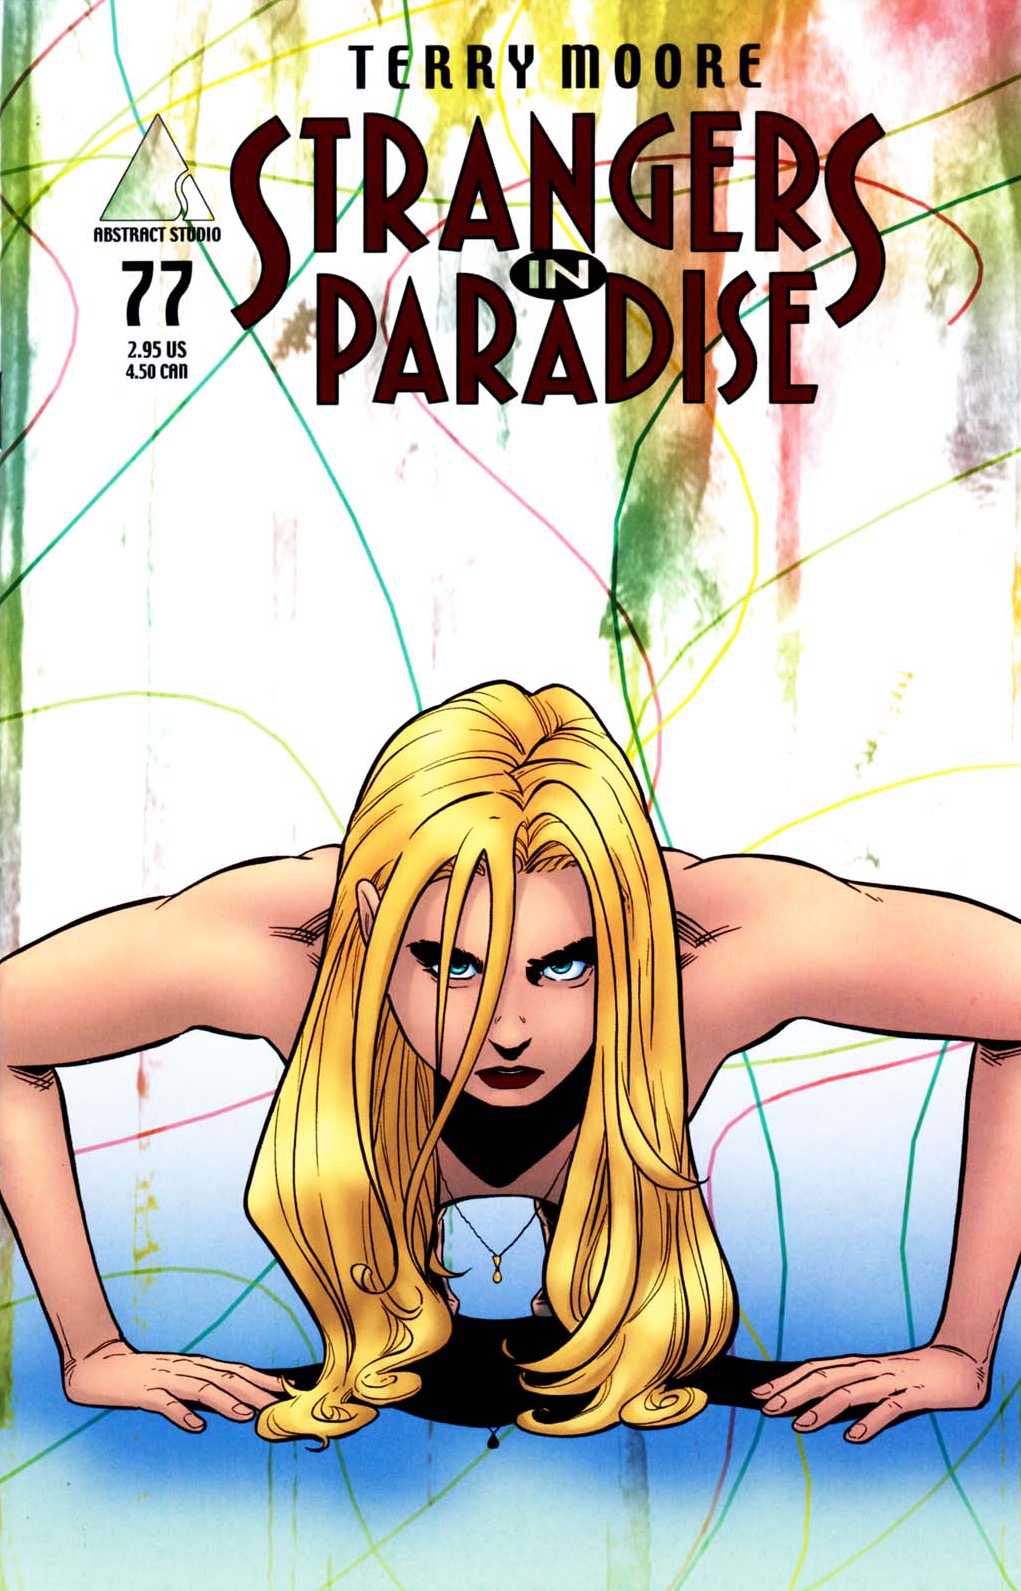 Read online Strangers in Paradise comic -  Issue #77 - 1